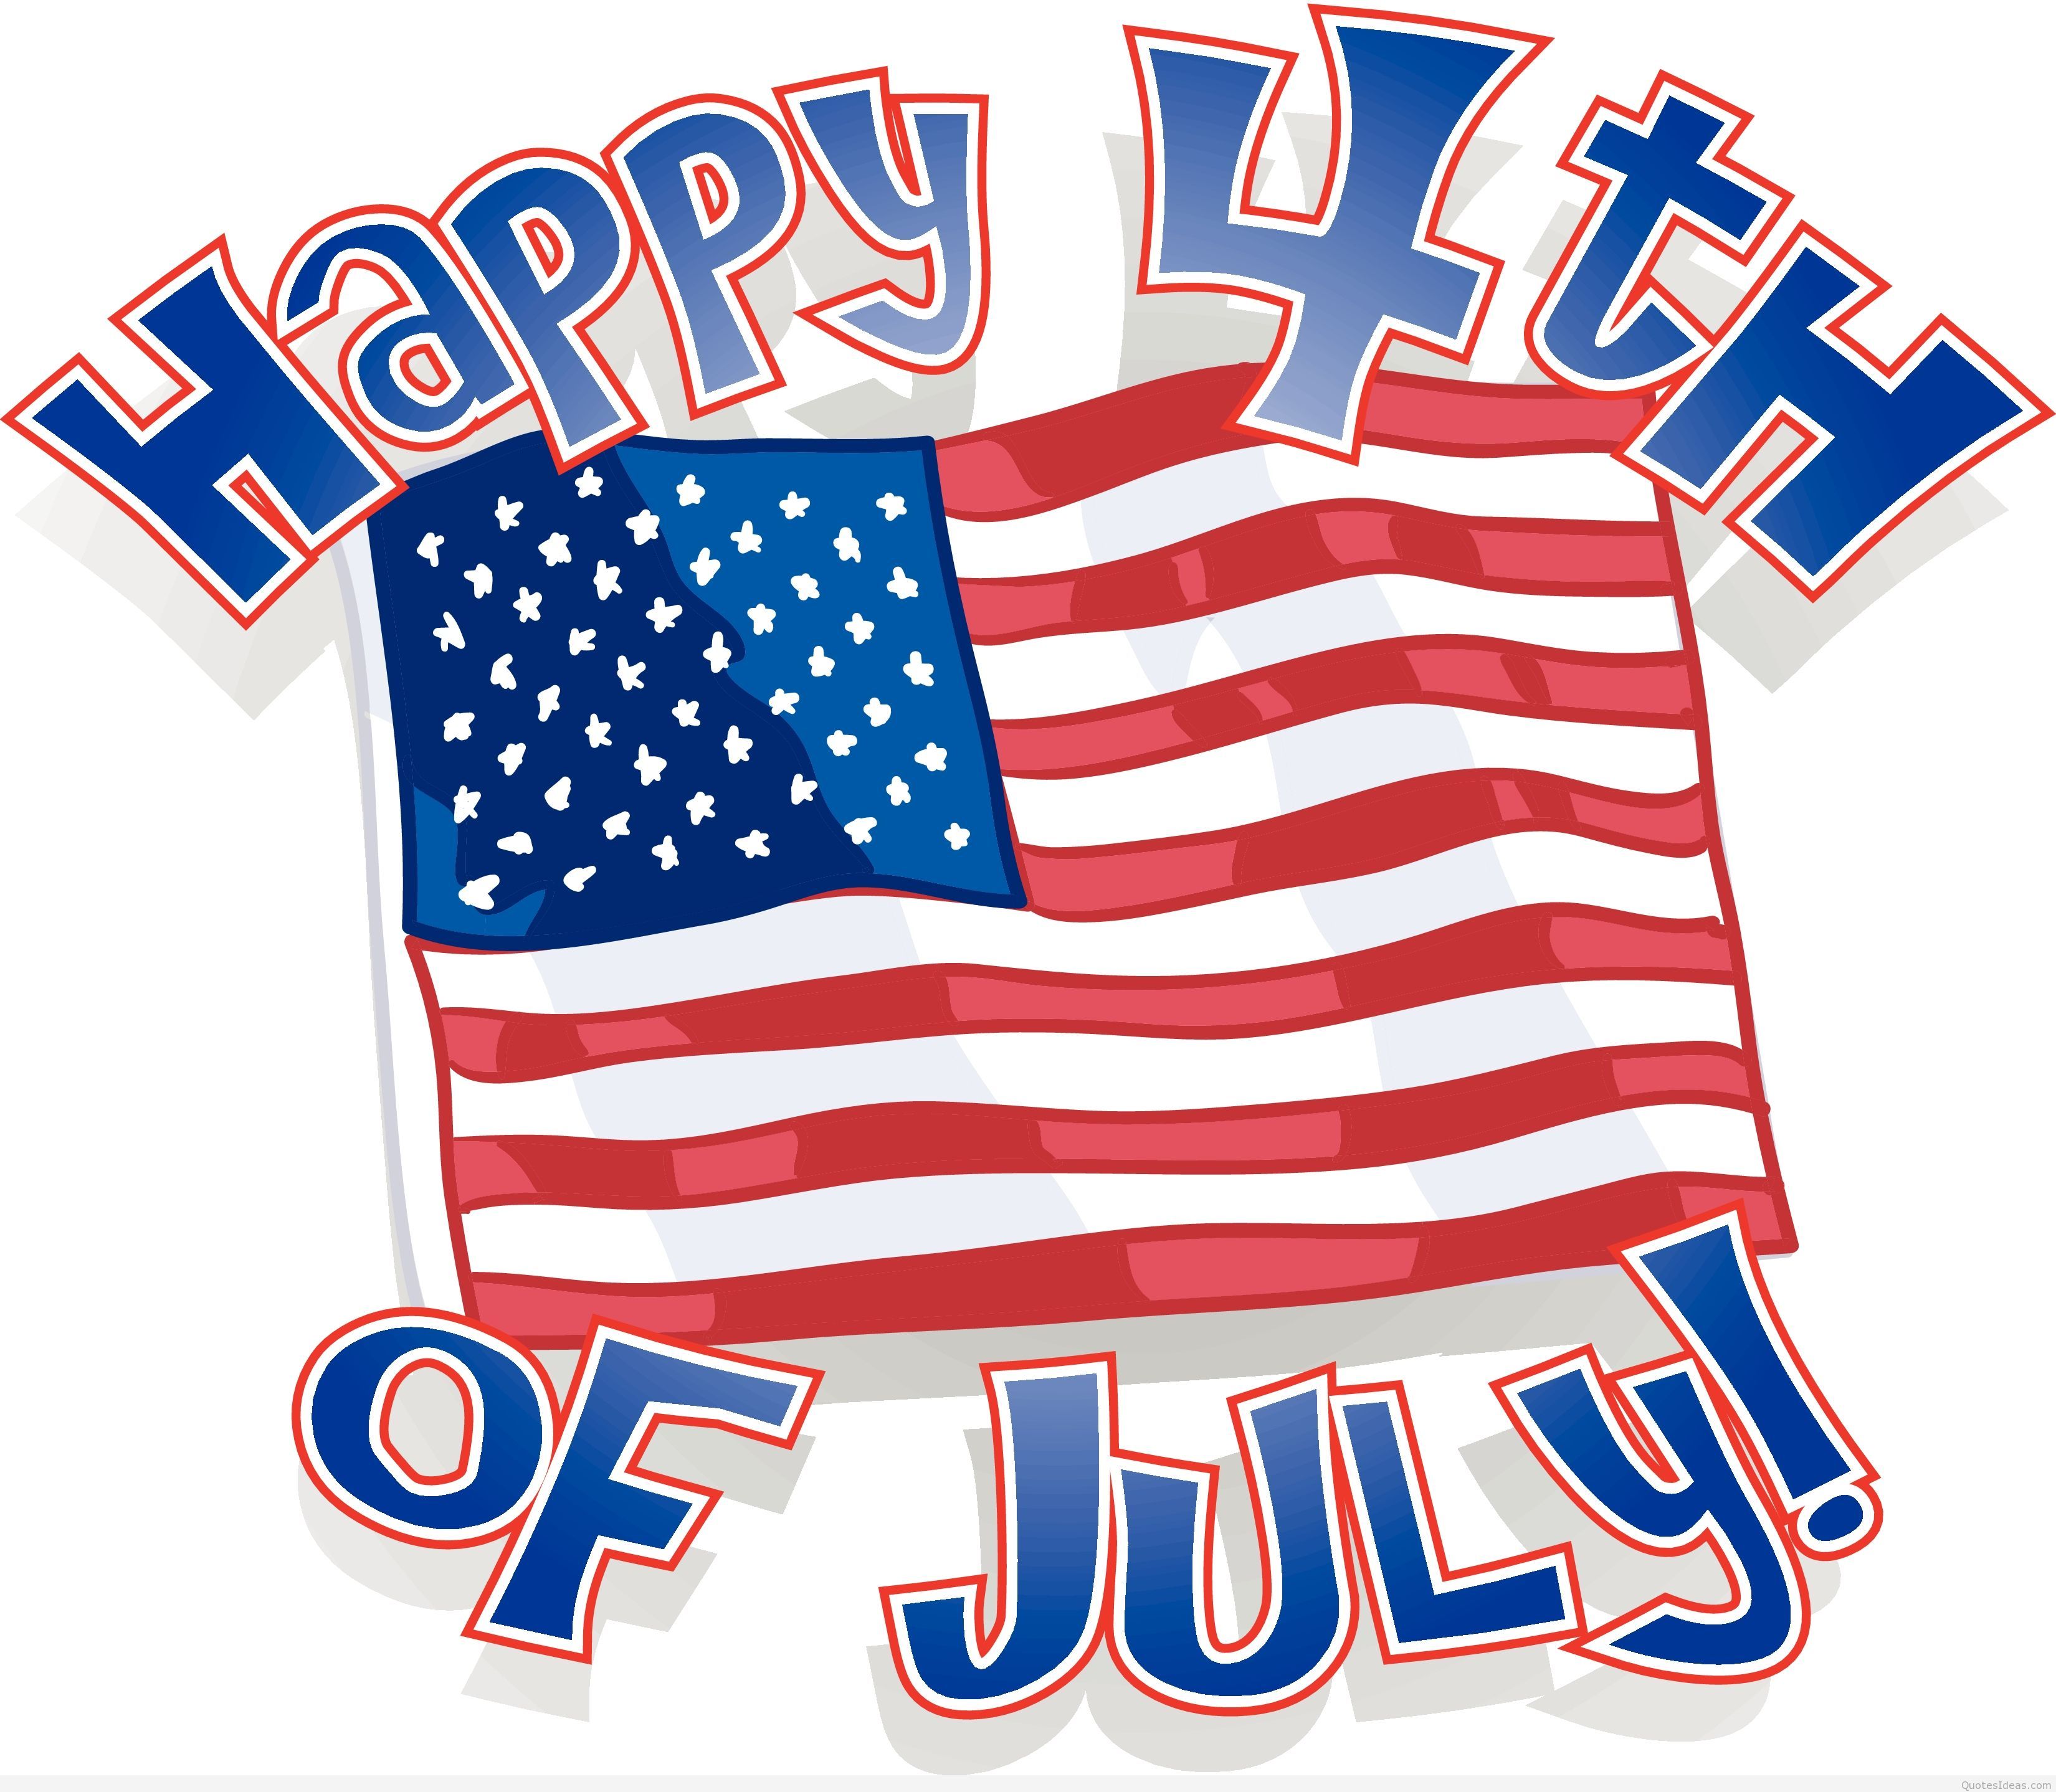 Annual 4th of July Celebration – Putnam County